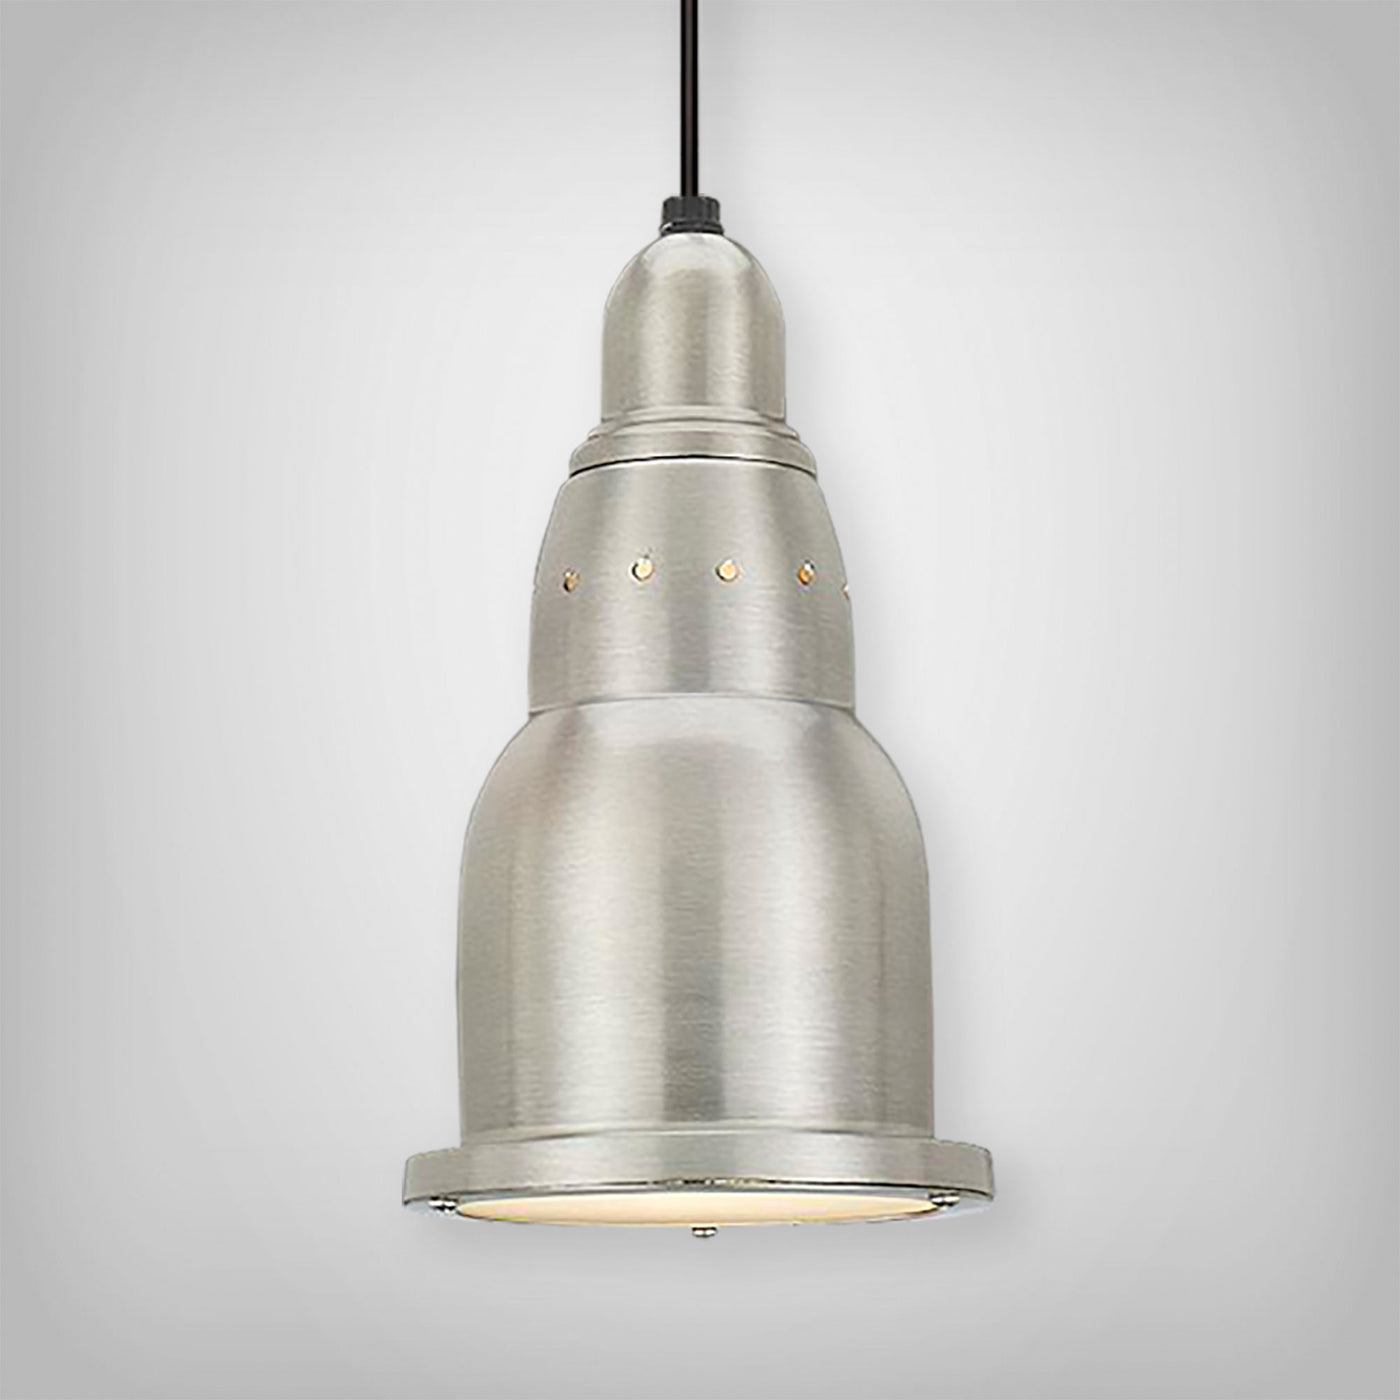 JIB611 Series 1 Light Cord Hung Cafe Lites, Multiple Finishes Available